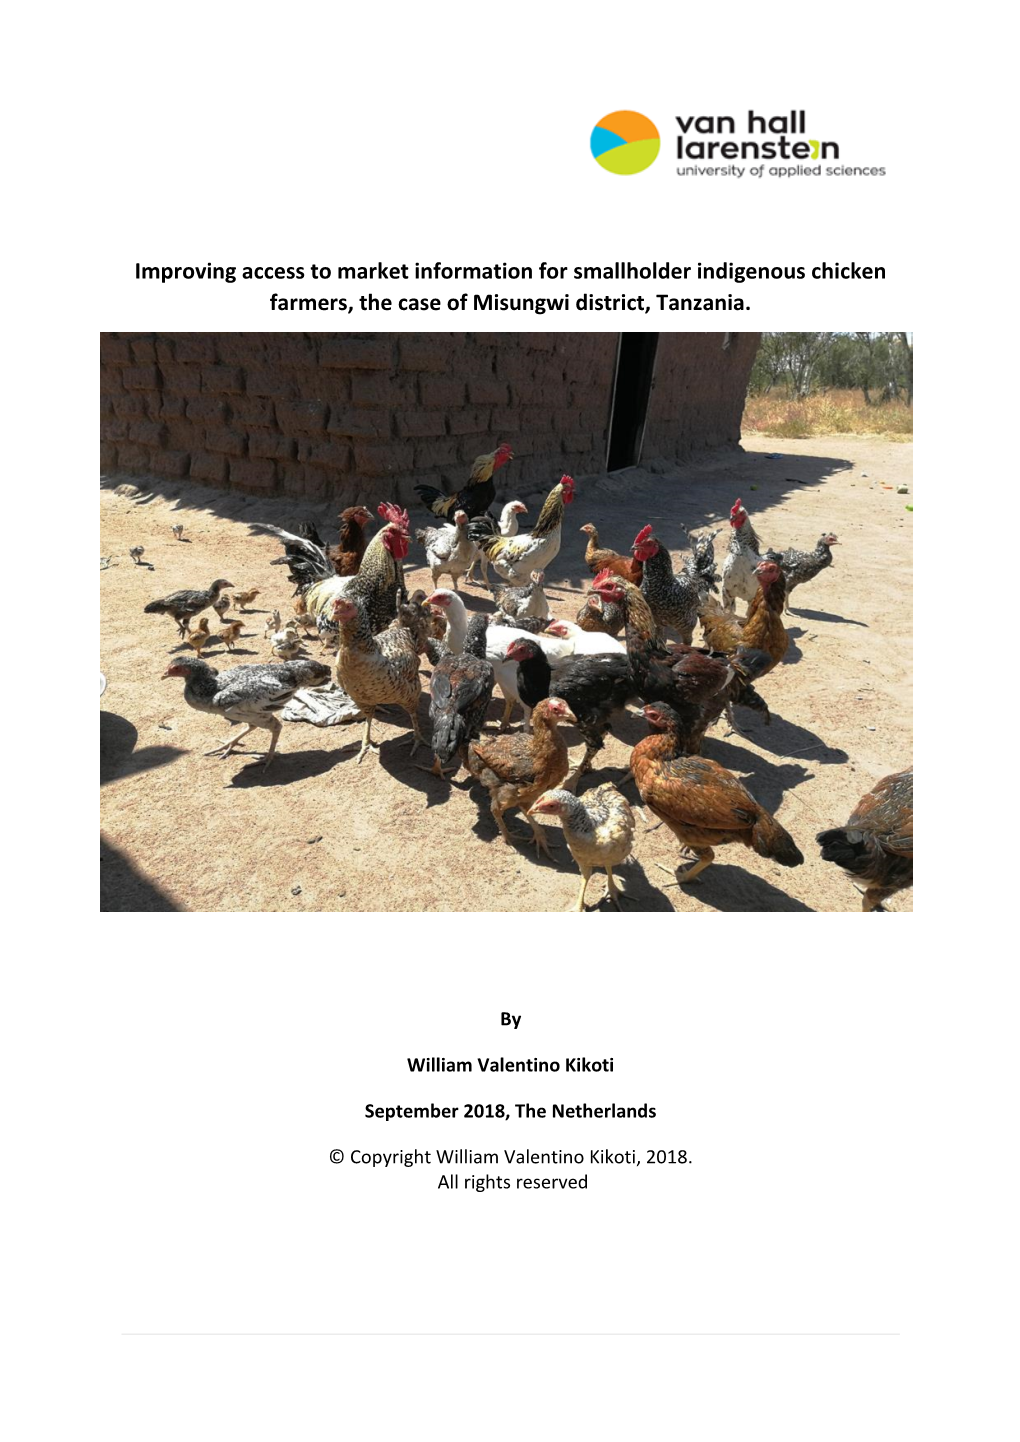 Improving Access to Market Information for Smallholder Indigenous Chicken Farmers, the Case of Misungwi District, Tanzania